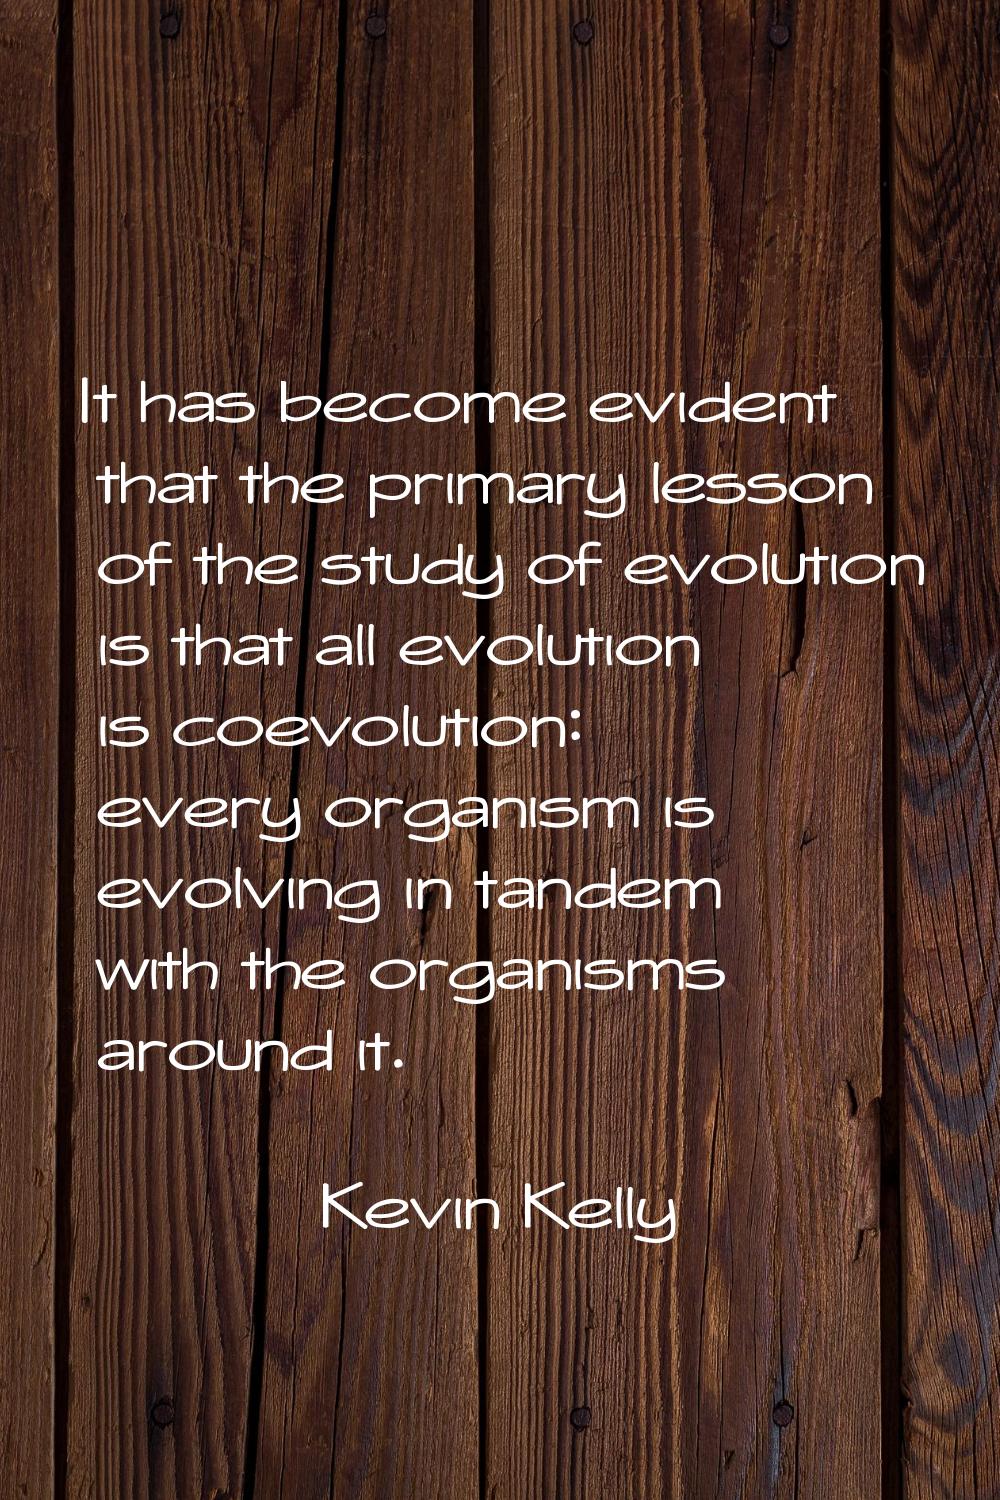 It has become evident that the primary lesson of the study of evolution is that all evolution is co